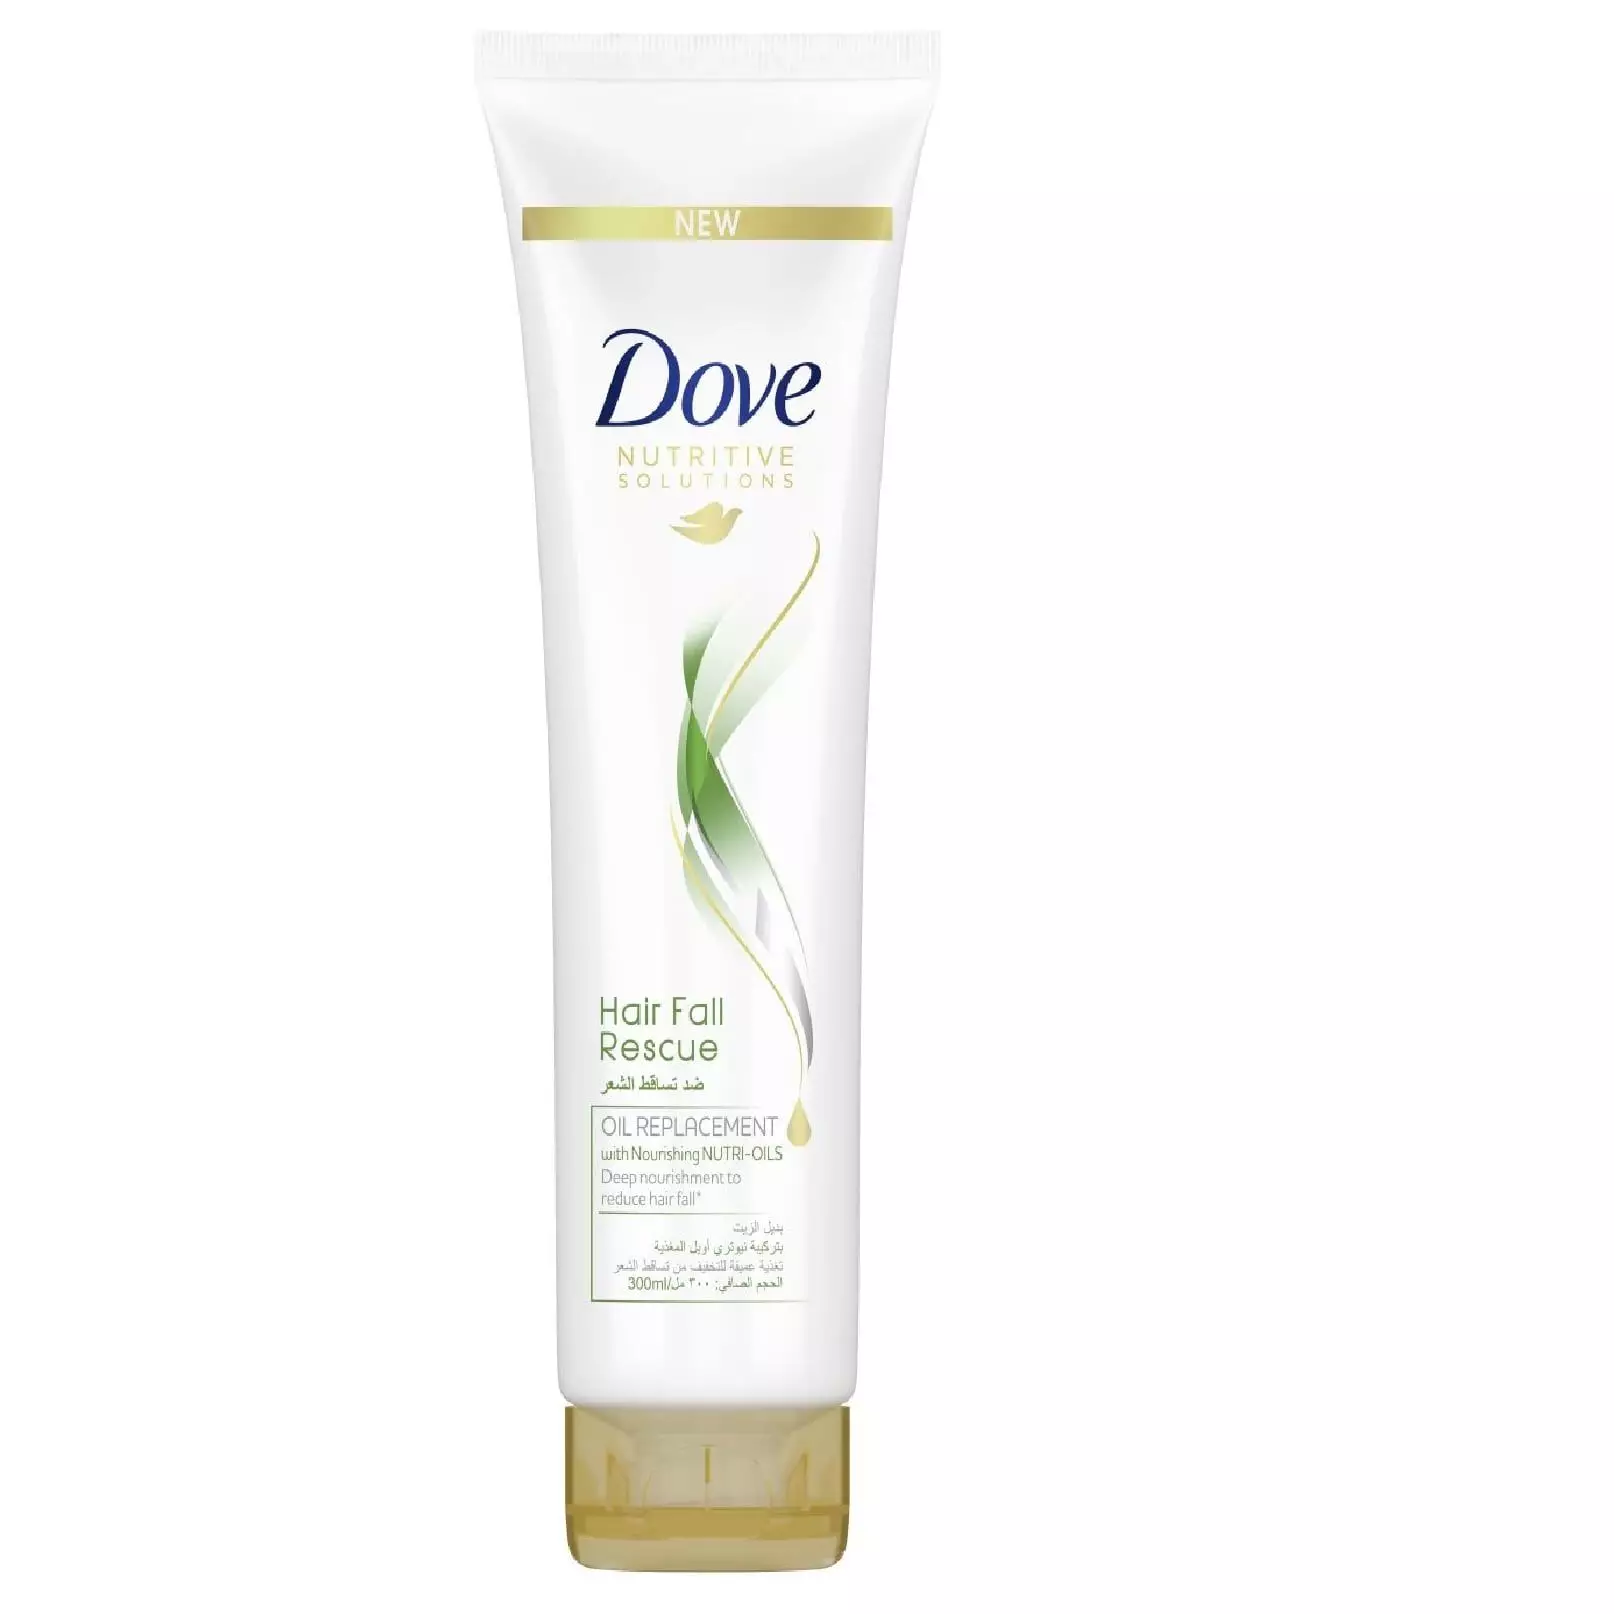 DOVE OIL REPLACEMRNT HAIR FALL RESCUE 300ML